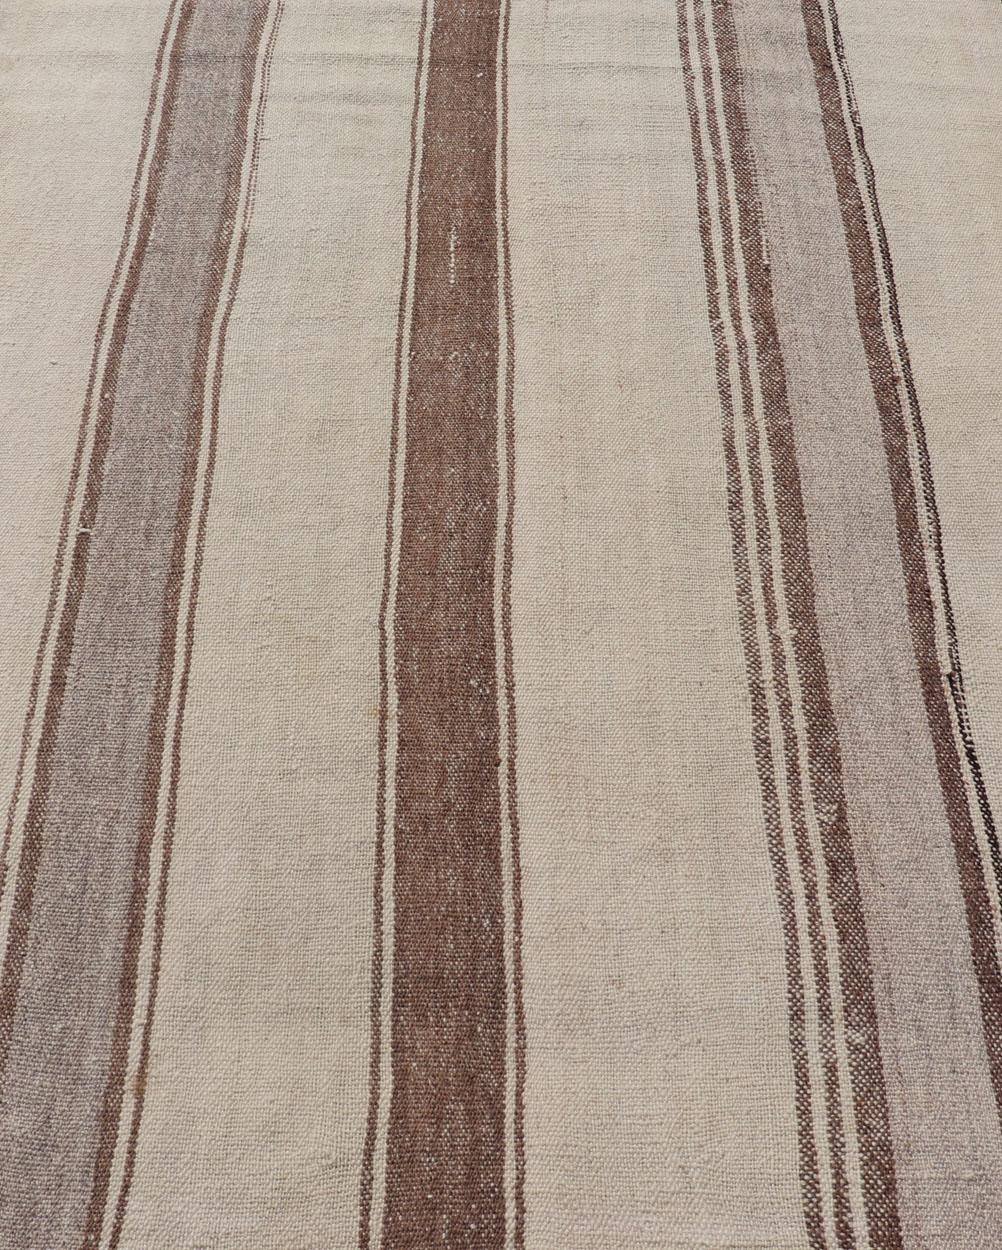 20th Century Vintage Turkish Kilim with Stripes in Tan, Gray, Taupe, Cream & Brown For Sale